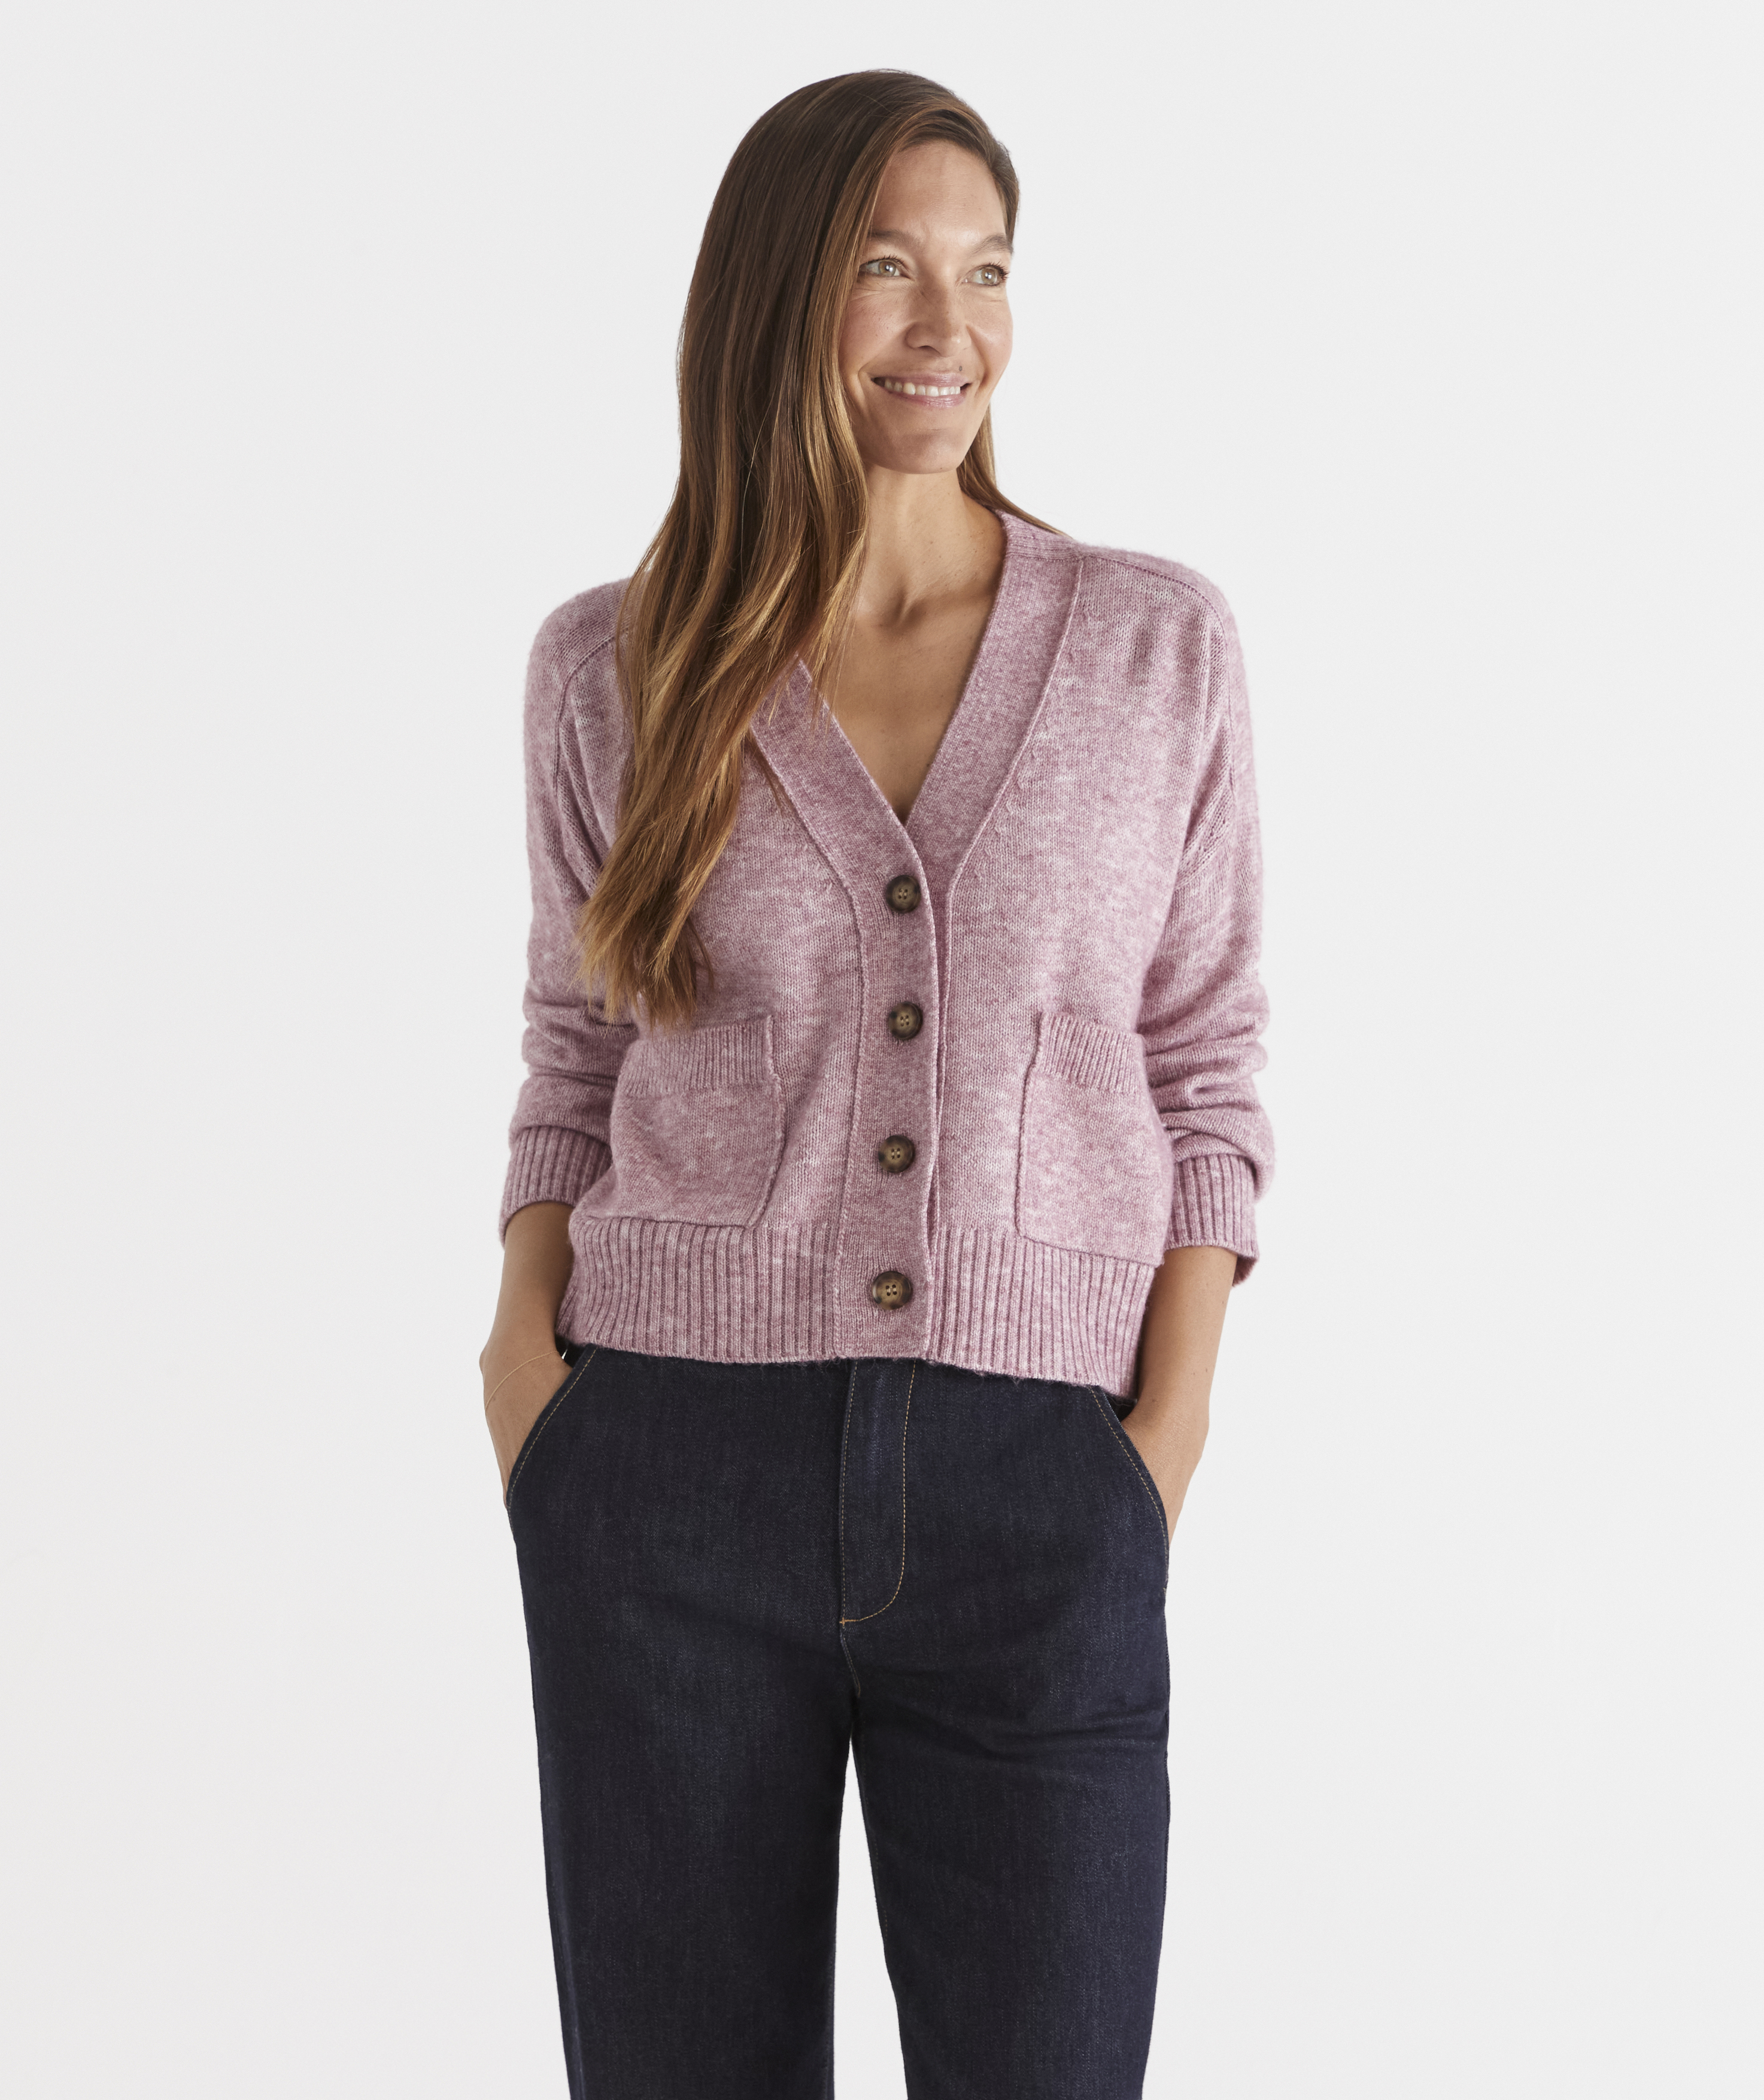 A woman is smiling and wearing a cozy, button-up cardigan with pockets, paired with dark pants